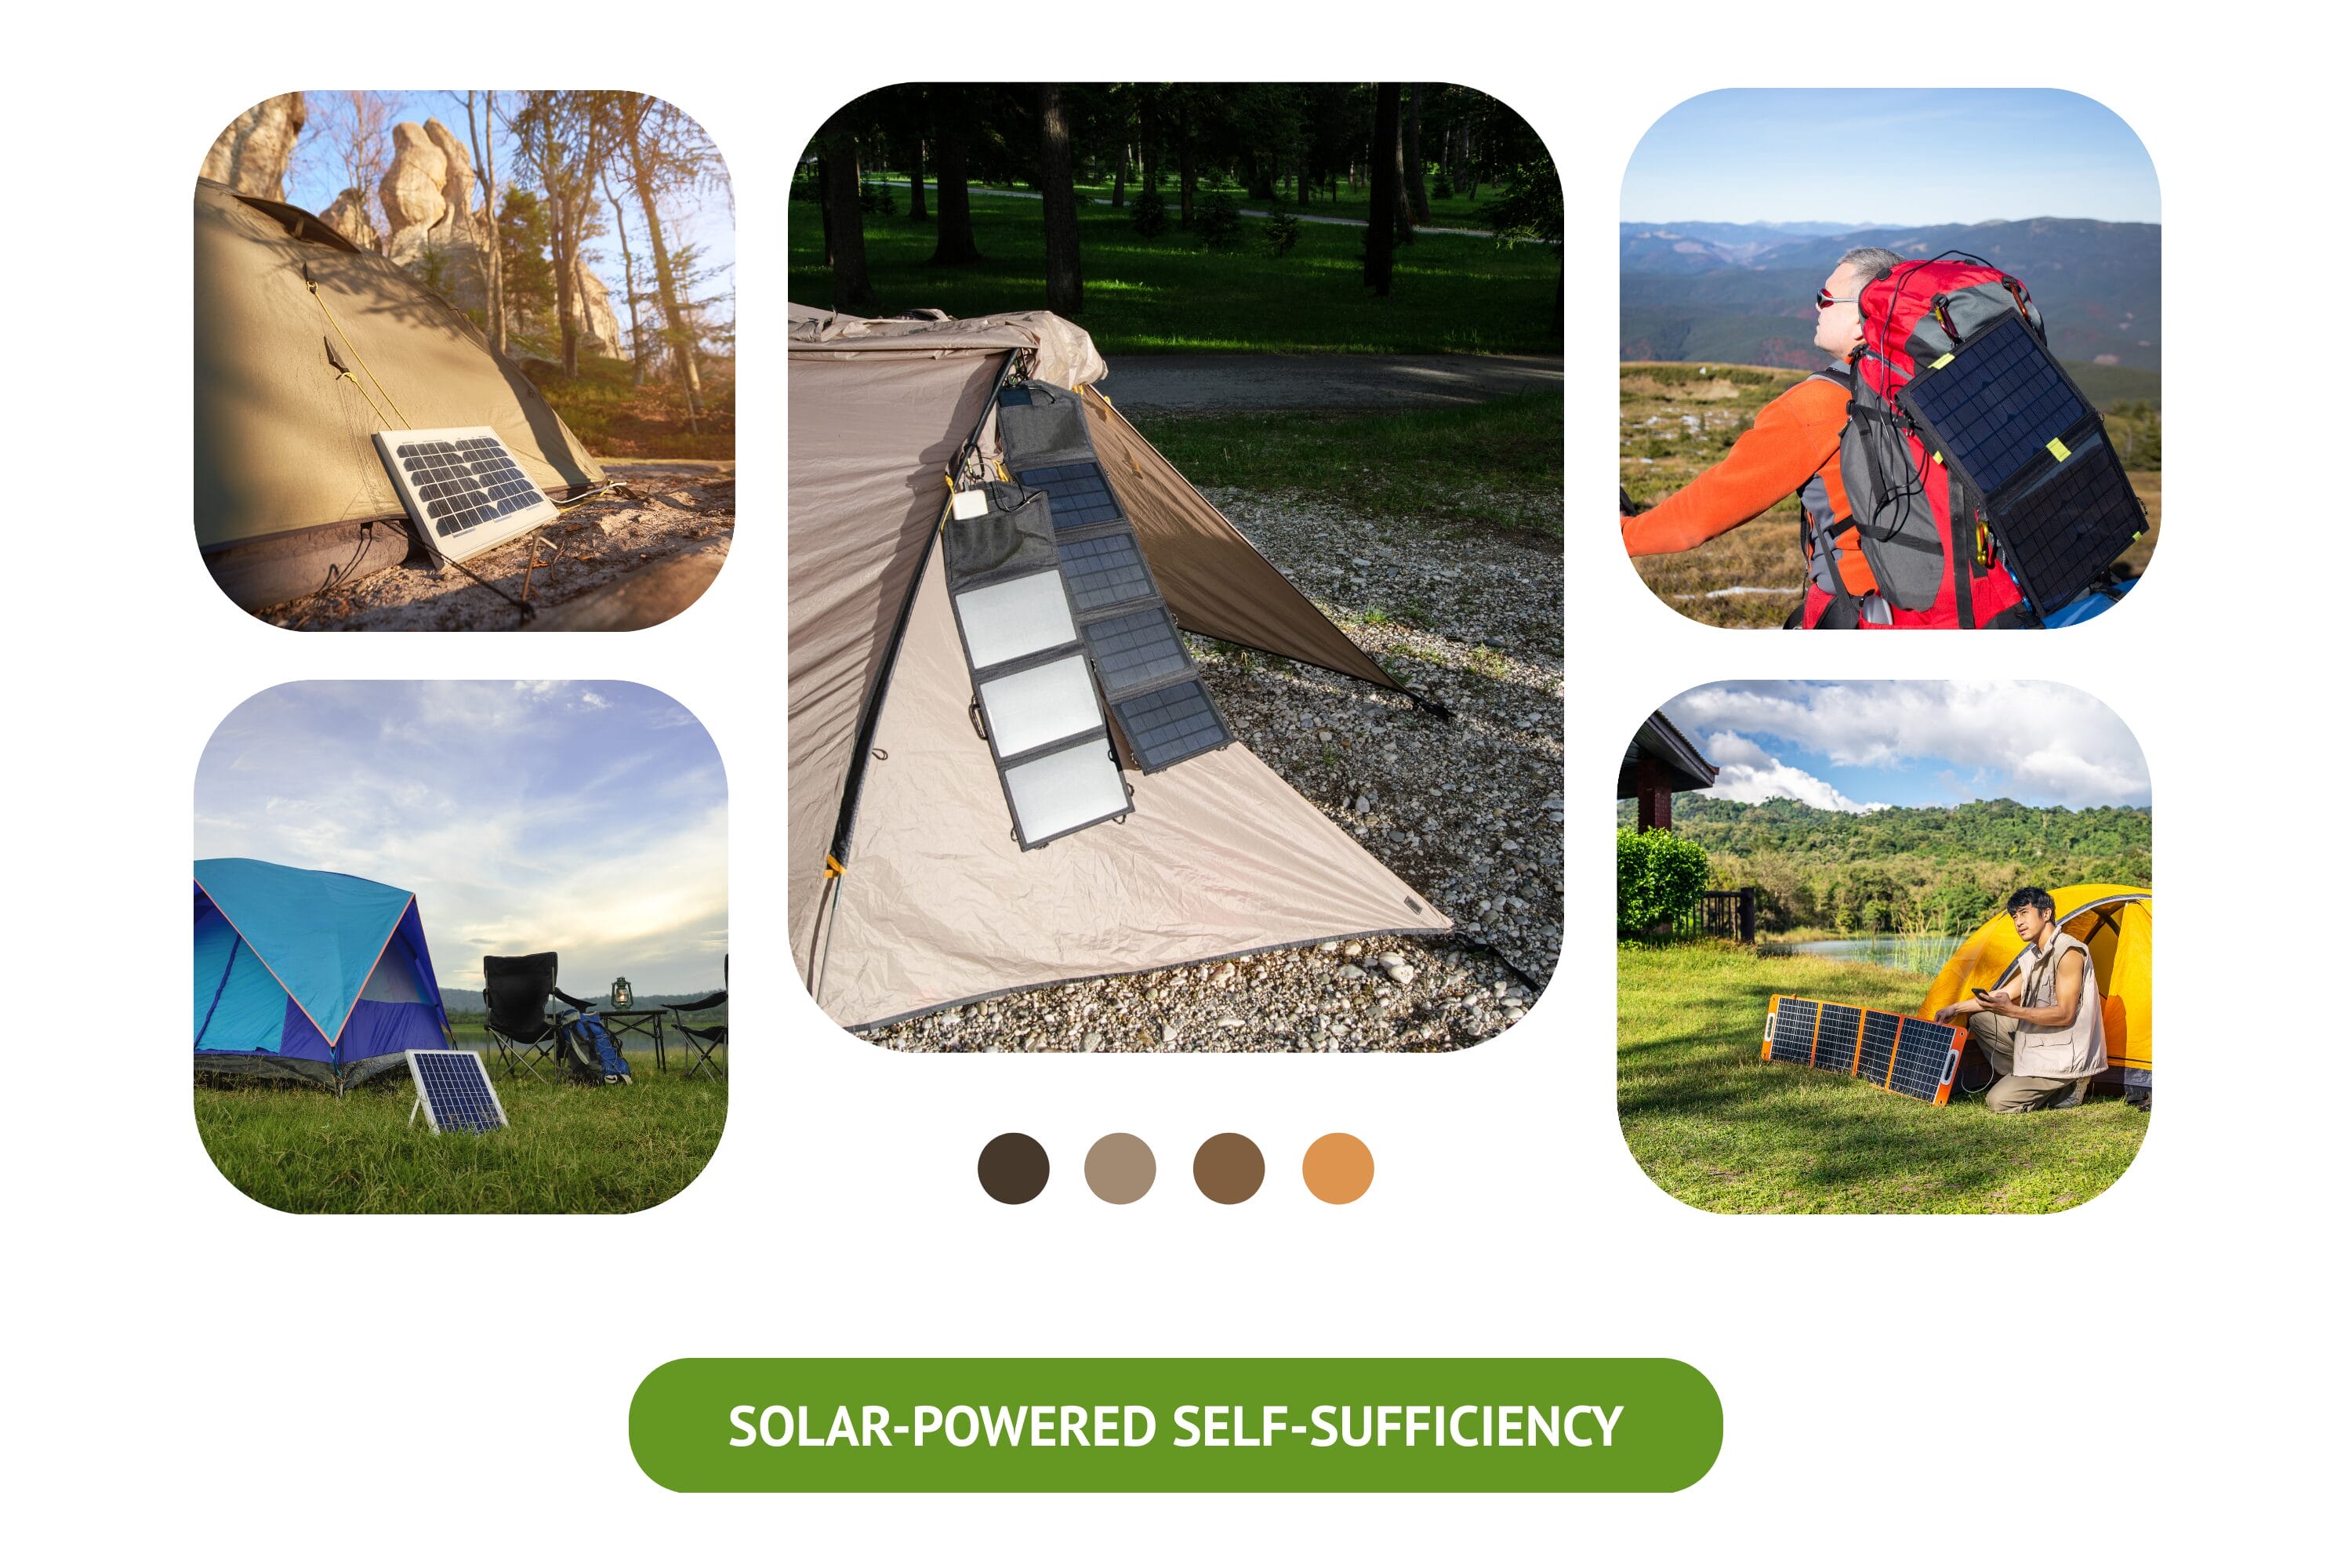 Solar-Powered Self-Sufficiency